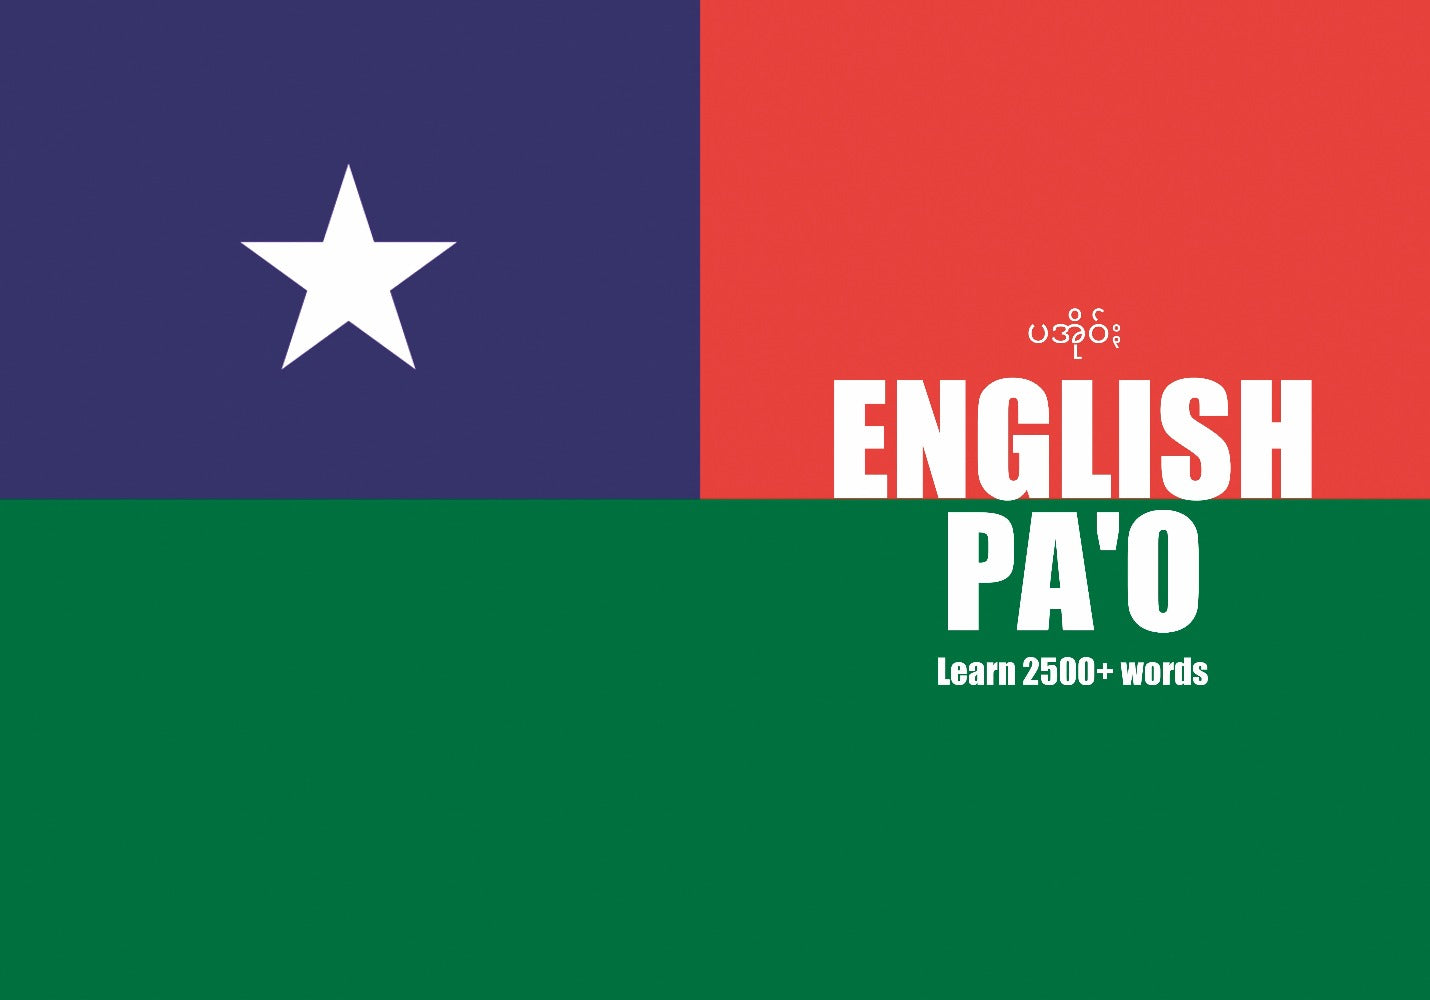 Pa'o language learning notebook cover